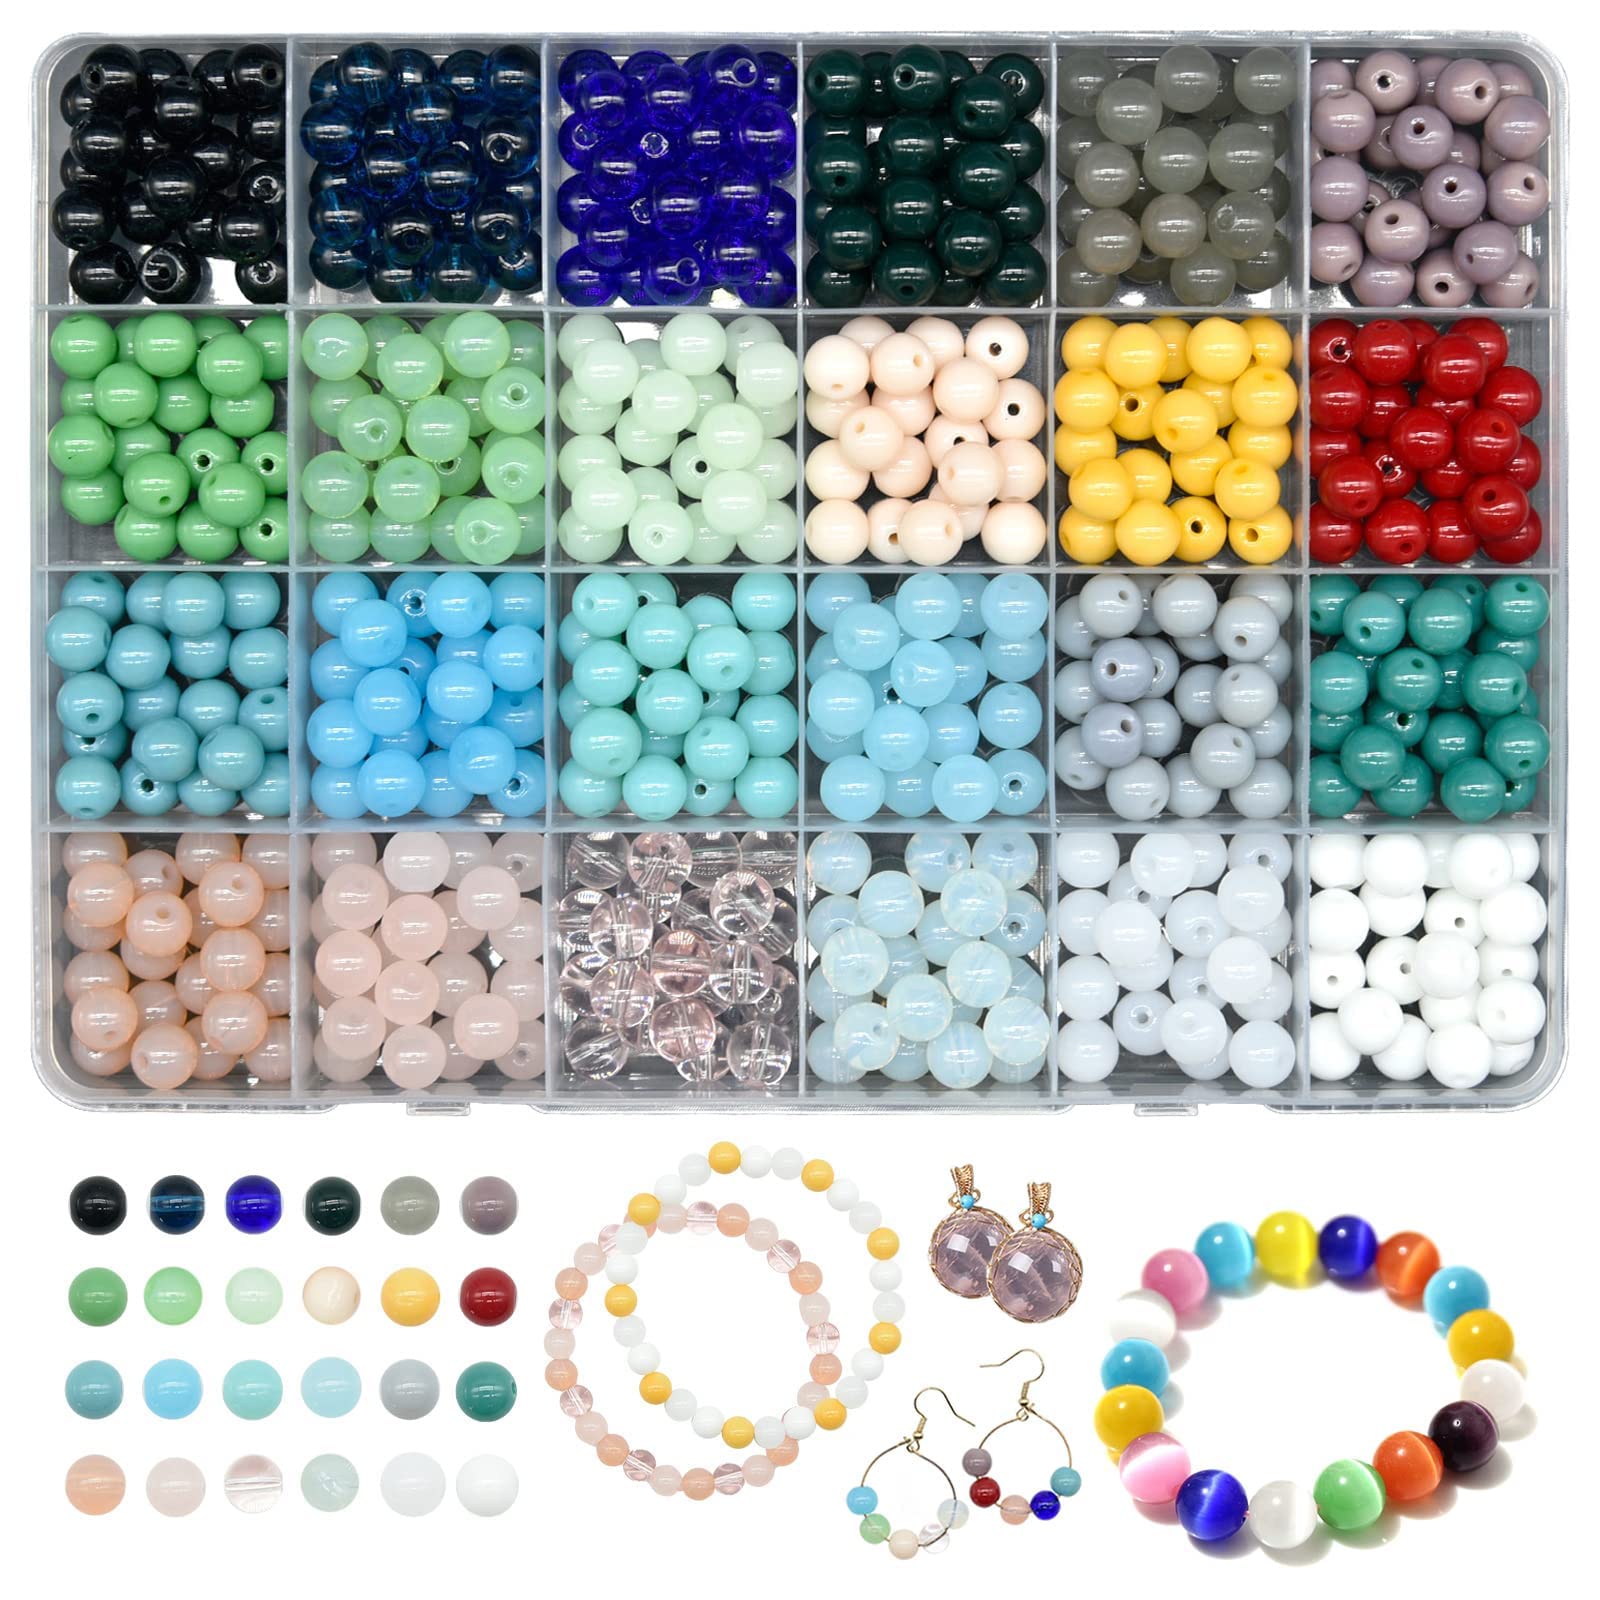 A World of Beads: The Make-Your-Own Jewelry Store